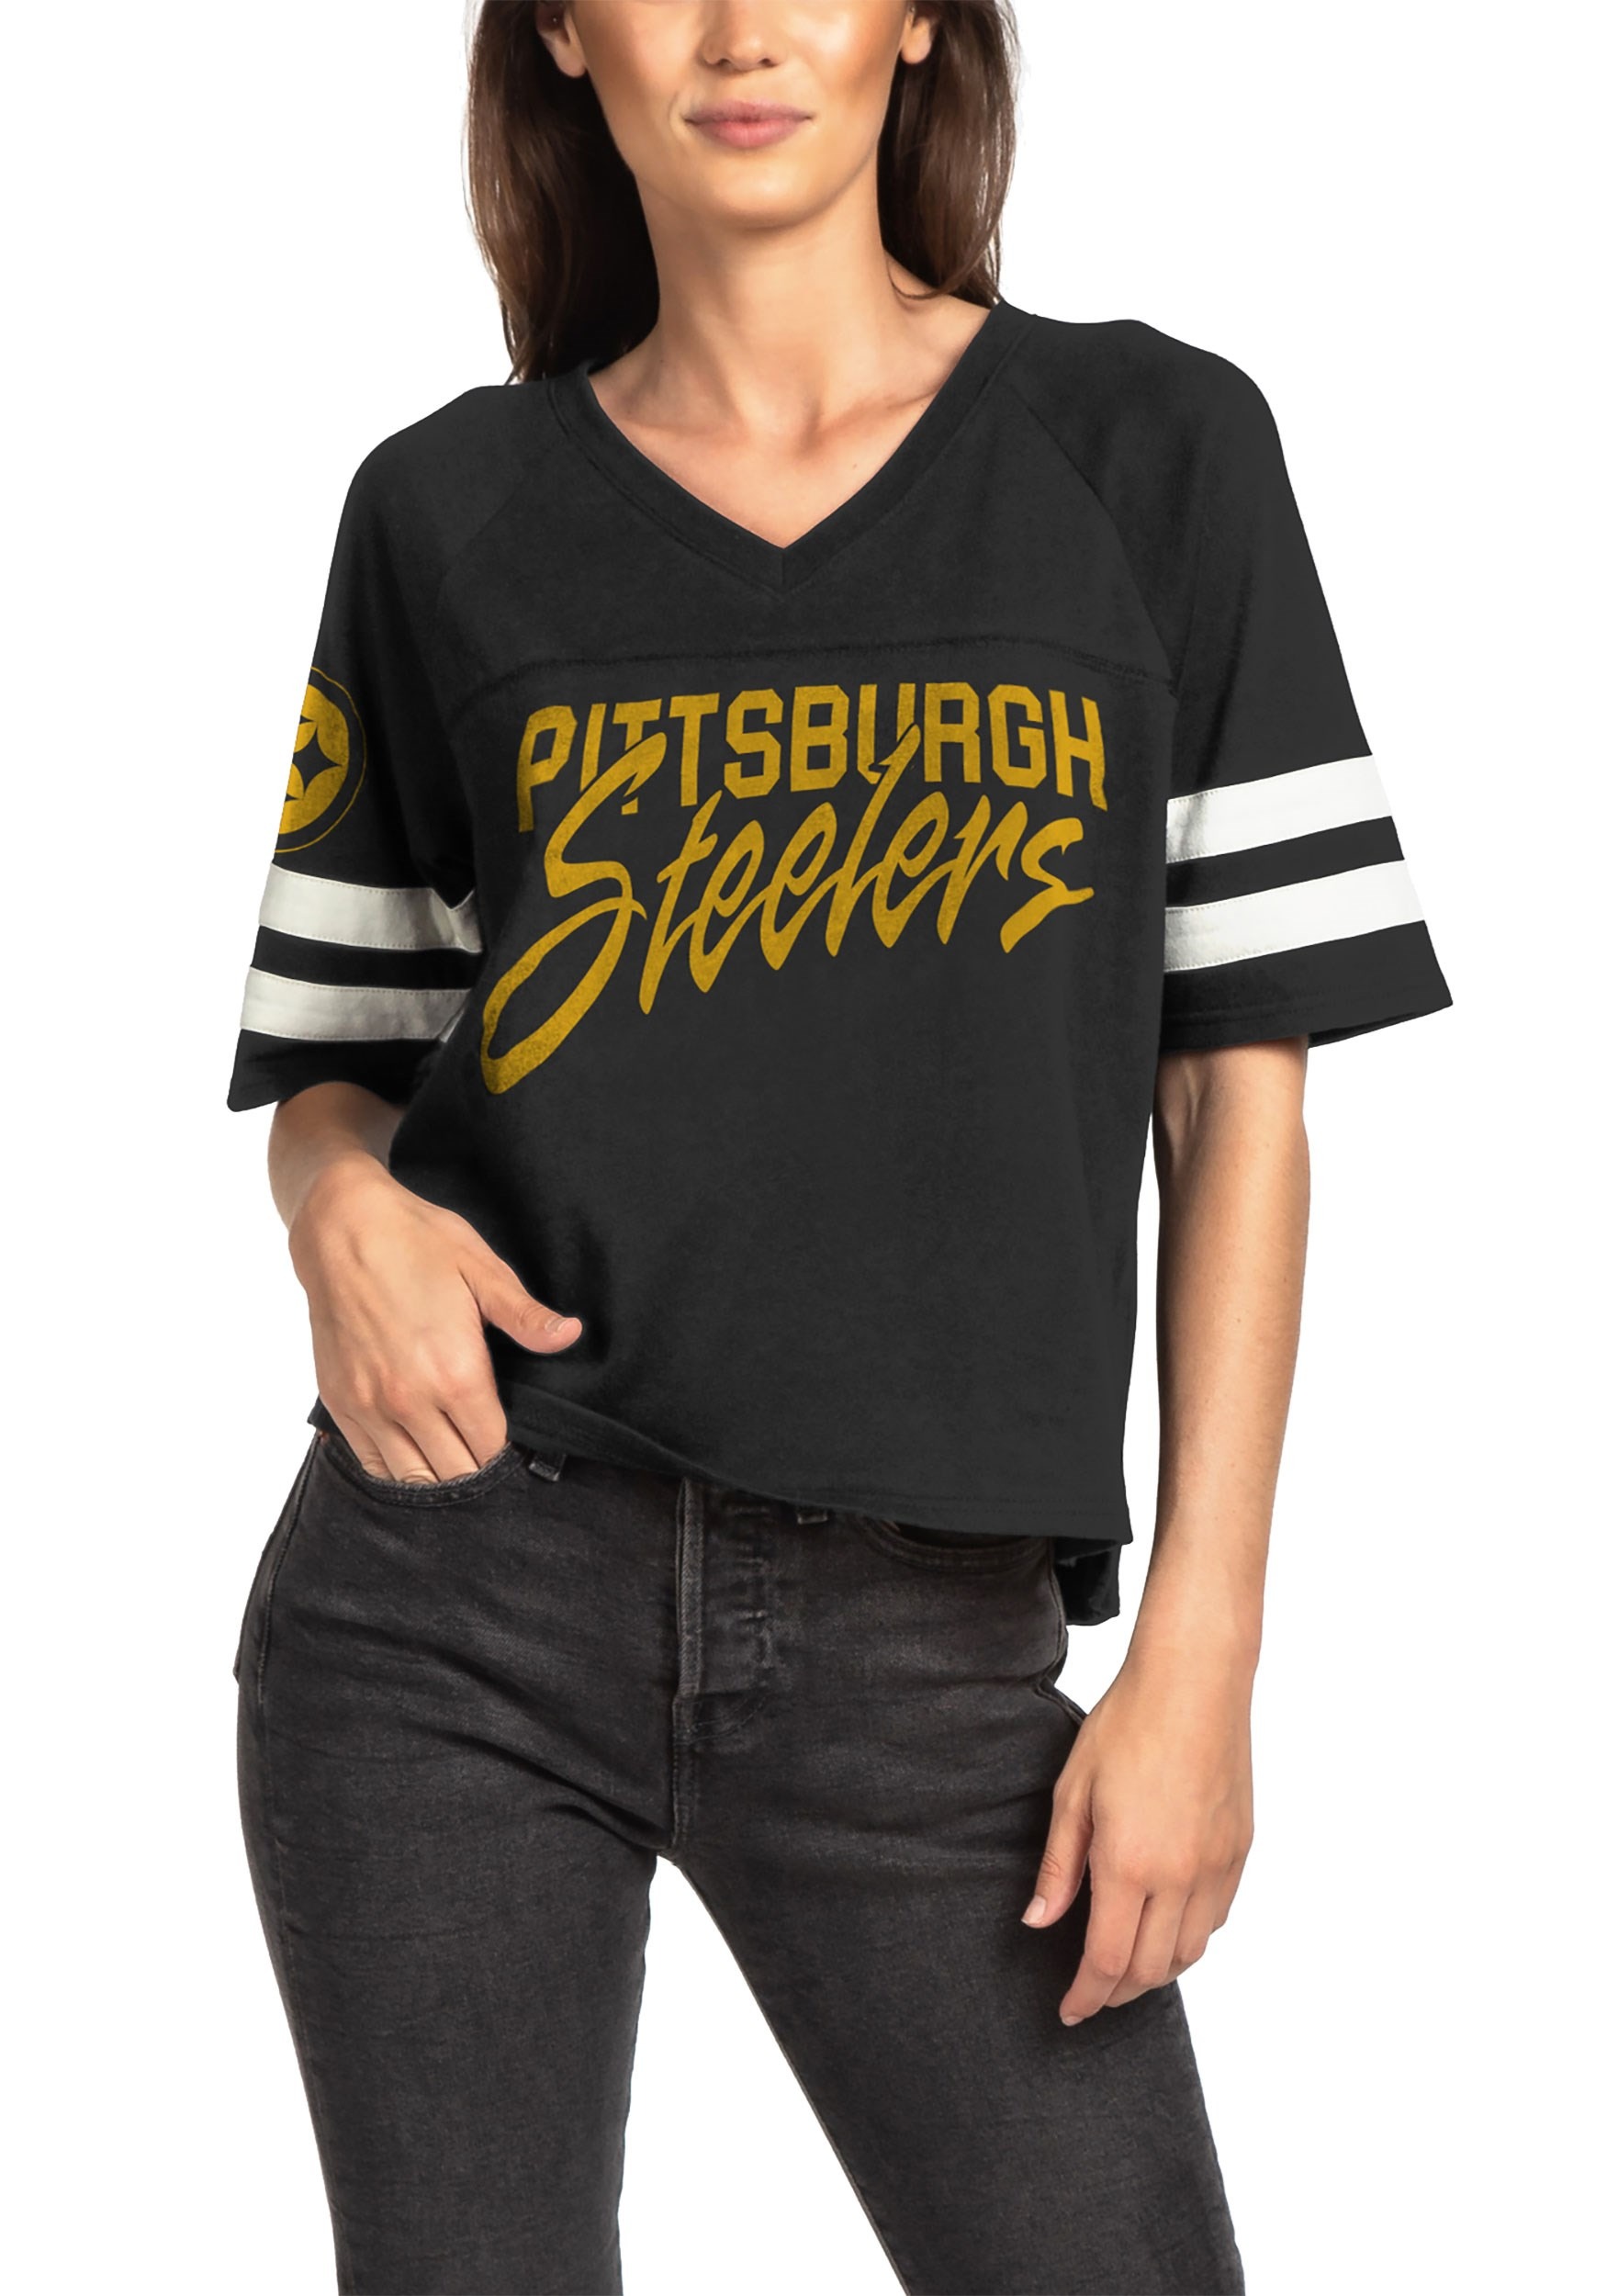 Pittsburgh Steelers Women collectibles